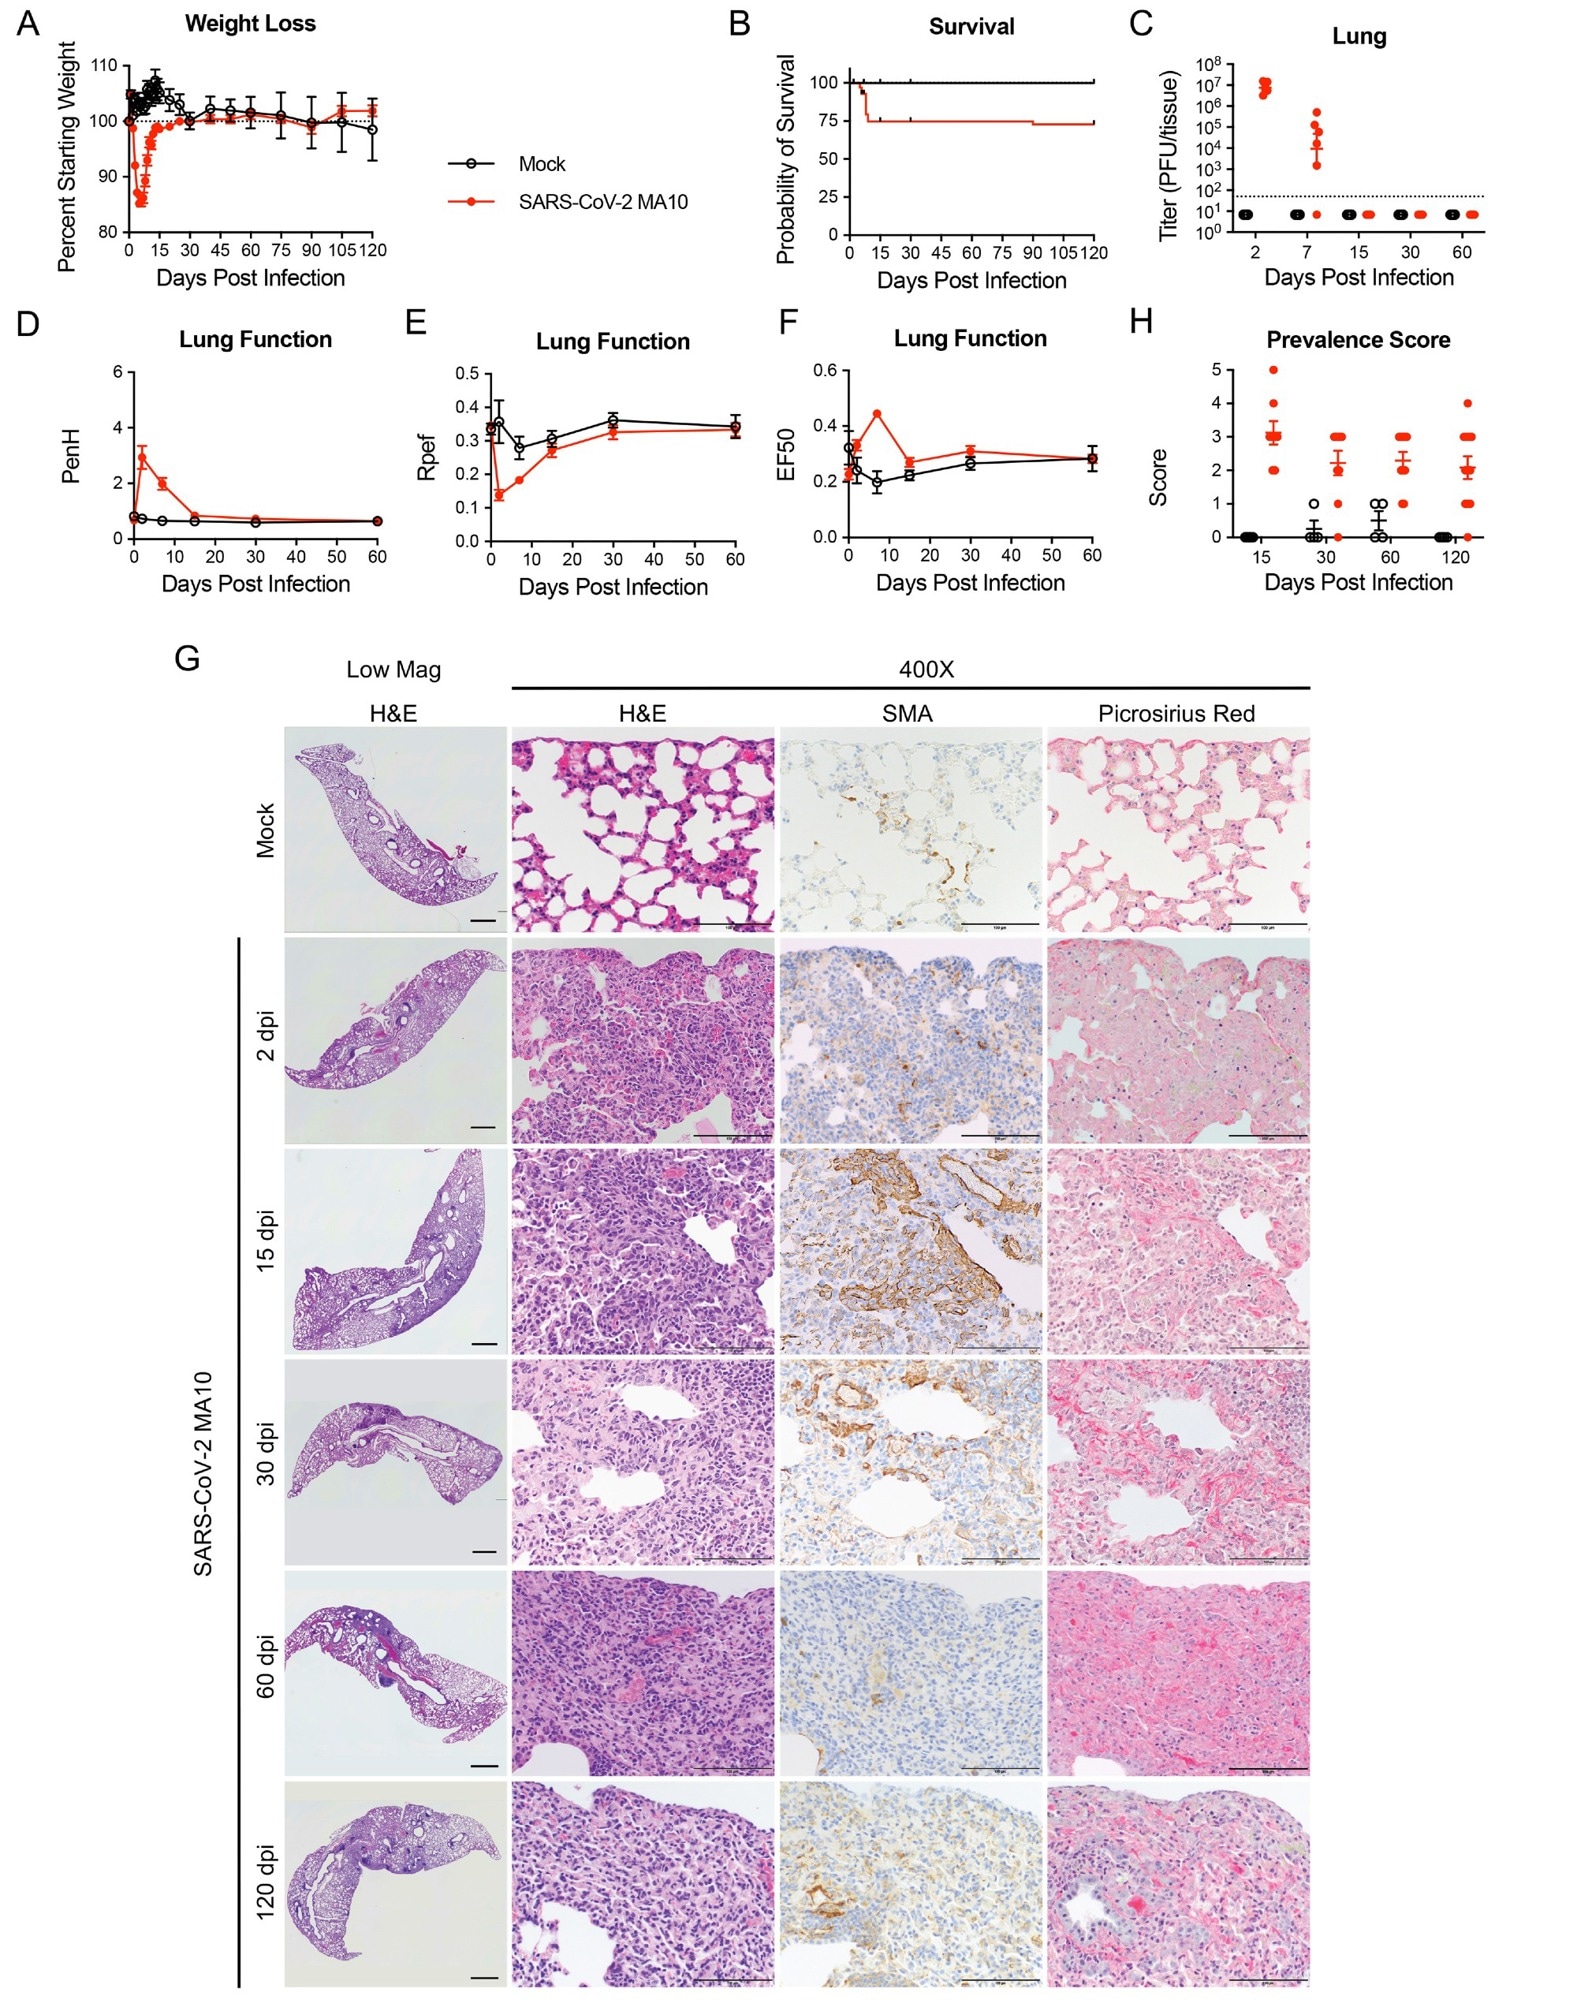 SARS-CoV-2 MA10 infection causes lung damage in aged surviving mice. 1-year-old female BALB/c mice were infected with 103 PFU SARS-CoV-2 MA10 (n=74) or PBS (n=24) and monitored for (A) percent starting weight and (B) survival. (C) Log transformed infectious virus lung titers were assayed at indicated time points. Dotted line represents LOD. Undetected samples are plotted at half the LOD. (D to F) Lung function was assessed by whole-body plethysmography for (D) PenH, (E) Rpef, and (F) EF50. (G) Histopathological analysis of lungs at indicated time points are shown. H&amp;E indicates hematoxylin and eosin staining. SMA indicates DAB-labeling (brown) immunohistochemistry for α-smooth muscle actin. Picrosirius Red staining (bright pink-red) highlights collagen fibers. Image scale bars represents 1000 μm for low magnification and 100 μm for 400X images. (H) Disease incidence scoring is shown for indicated time points: 0 = 0% of total area of examined section, 1 = less than 5%; 2 = 6 to 10%; 3 = 11 to 50%; 4 = 51 to 95%; 5 = greater than 95%. Graphs represent individuals necropsied at each time point (C and H), with the average value for each treatment and error bars representing standard error of the mean. Mock infected animals represented by open black circles and SARS-CoV-2 MA10 infected animals are represented by closed red circles.